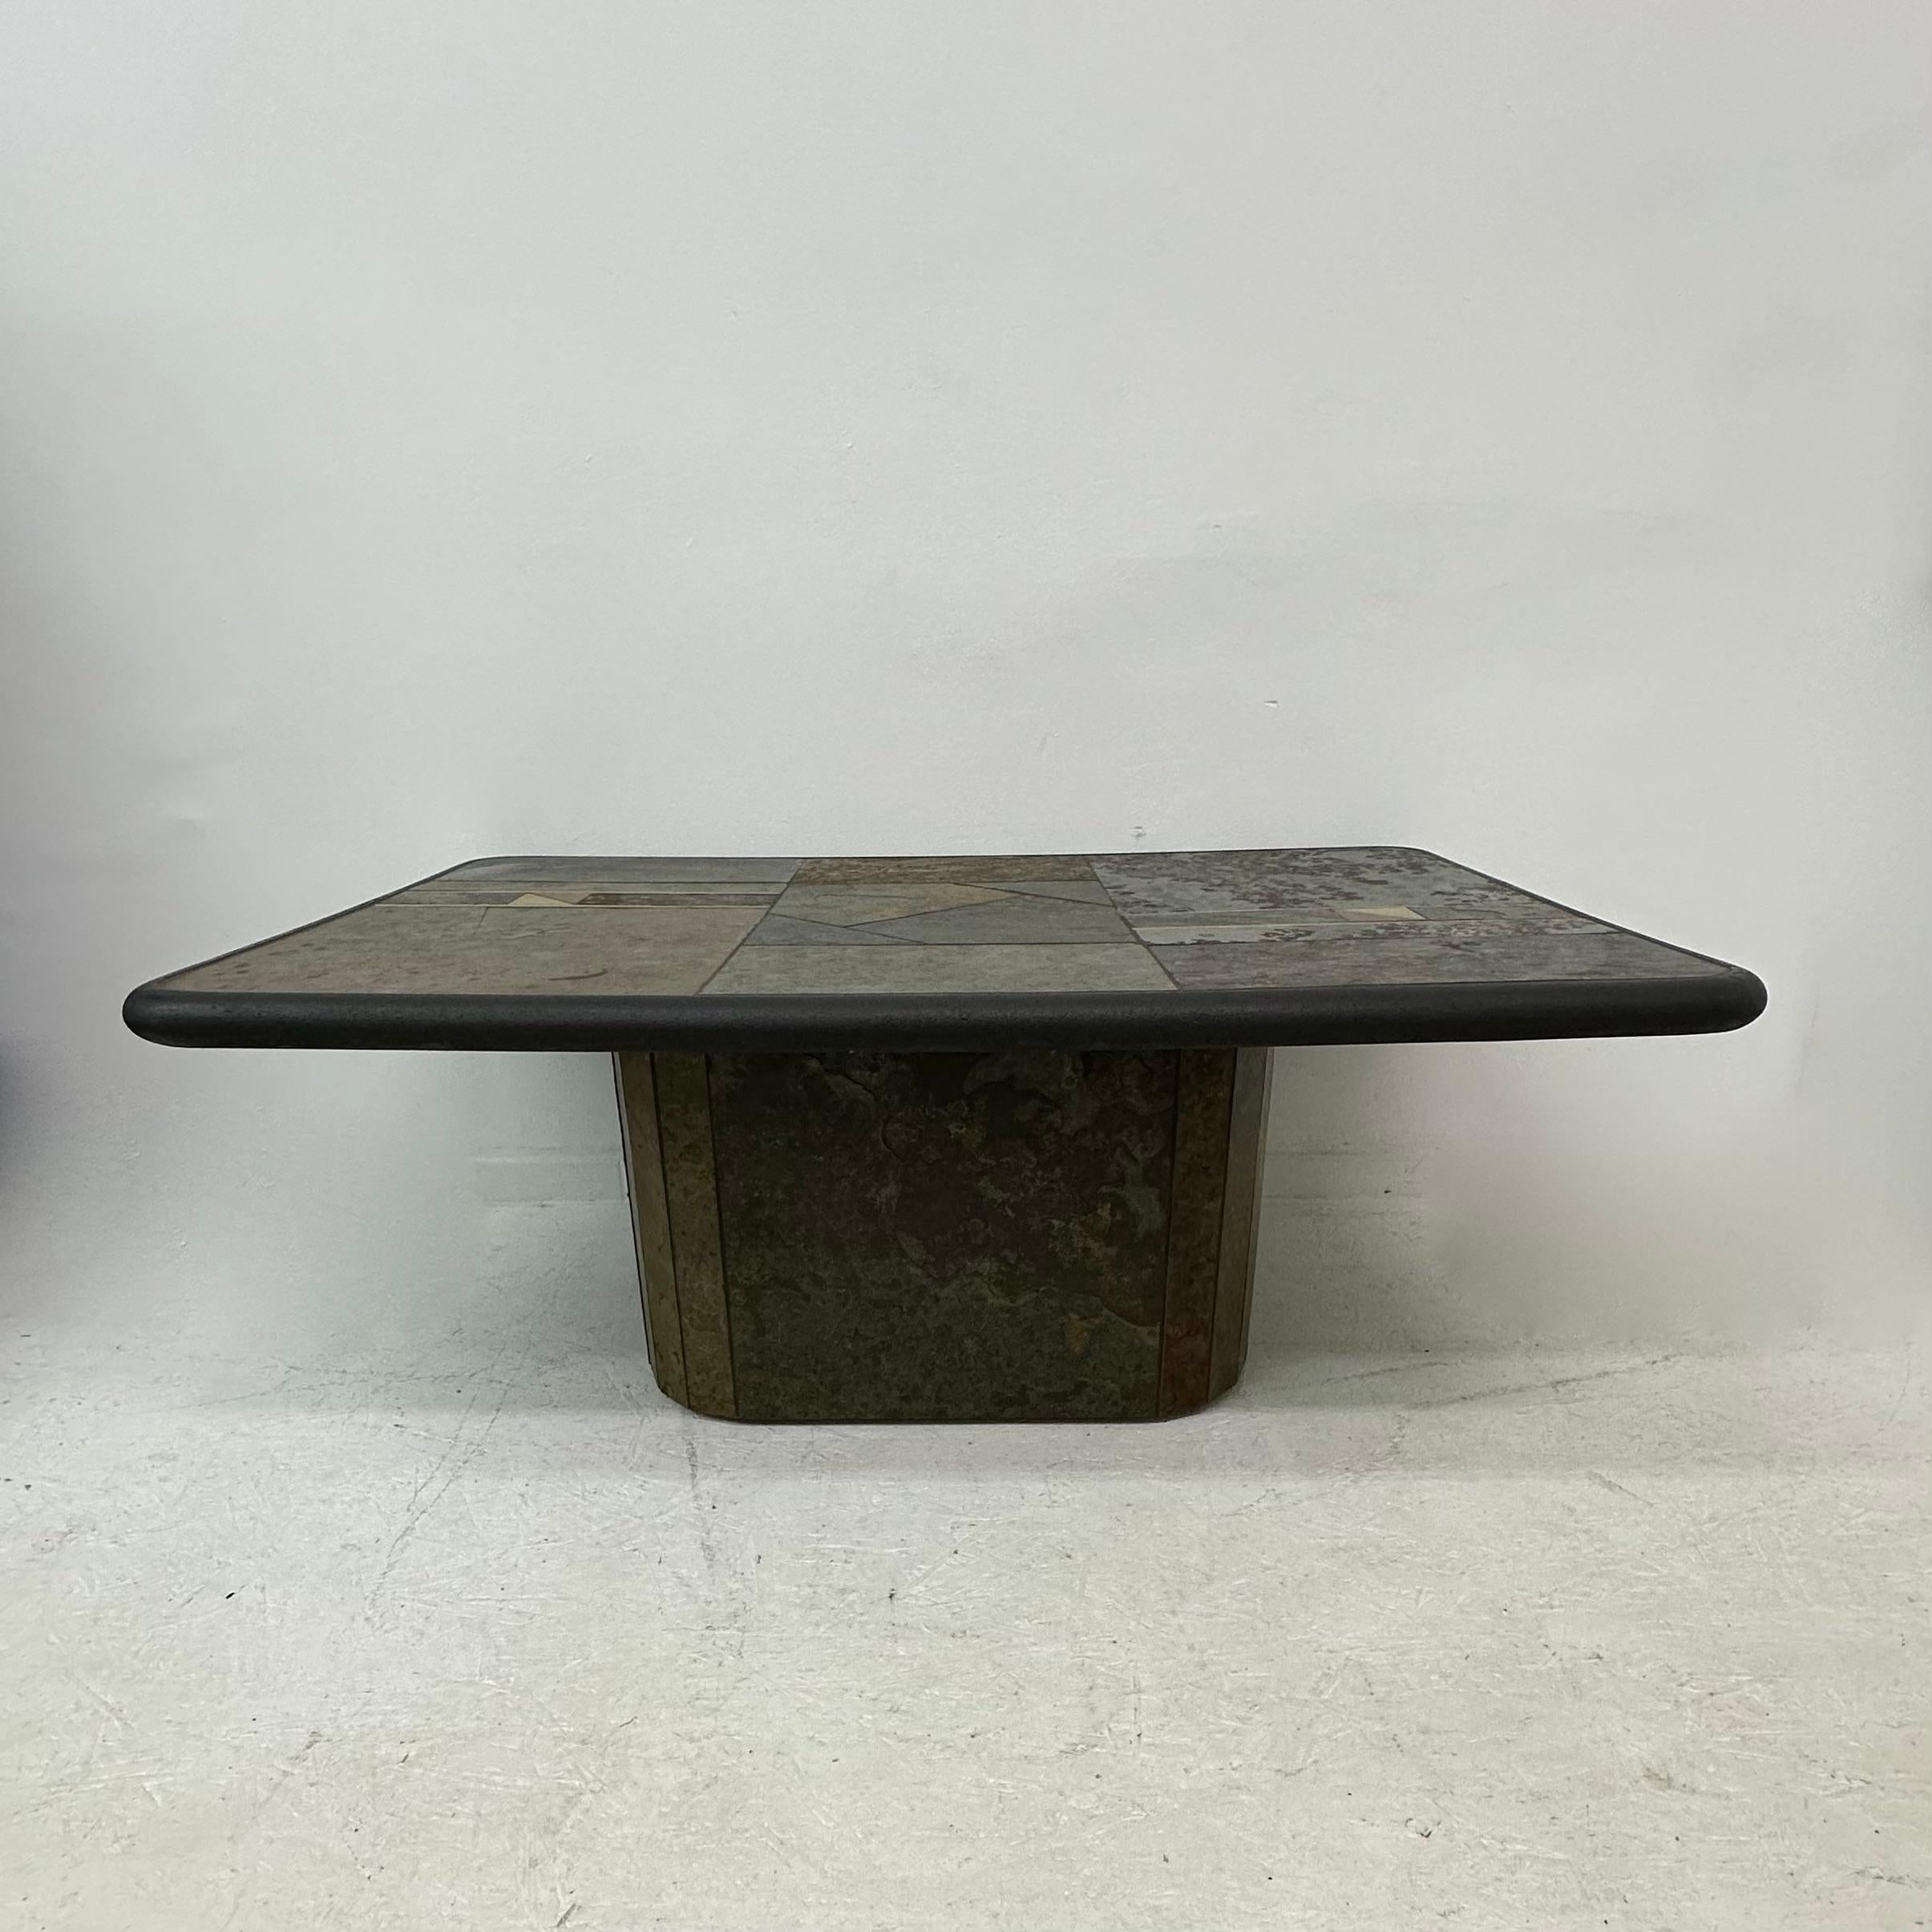 Brutalist coffee table natural stone , 1970’s

Dimensions: 120 cm W, 80cm D, 46,5cm H
Condition: Good
Period: 1970’s